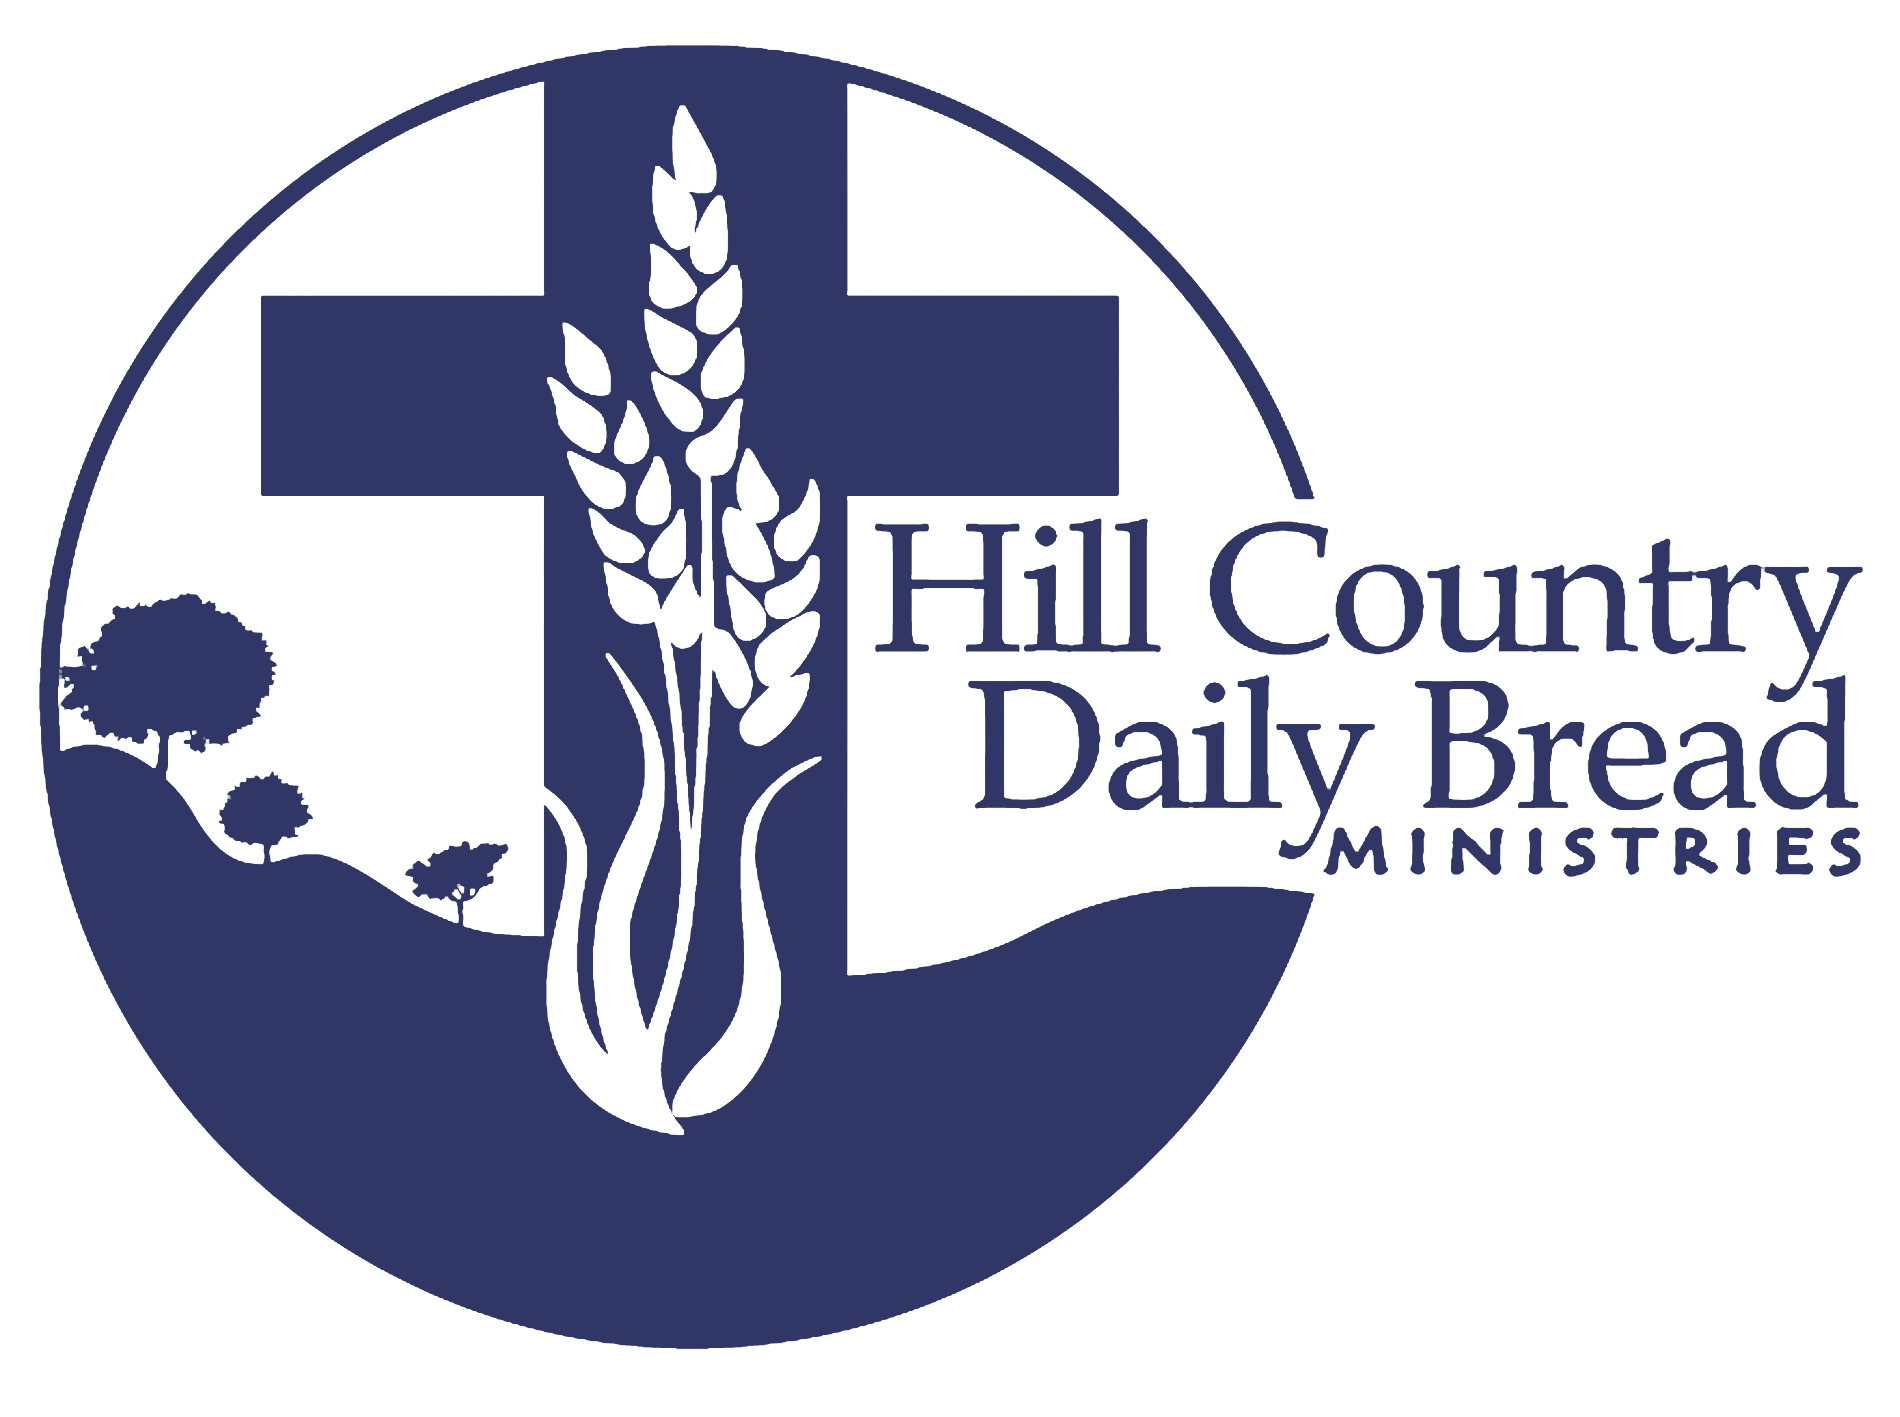 http://Hill%20Country%20Daily%20Bread